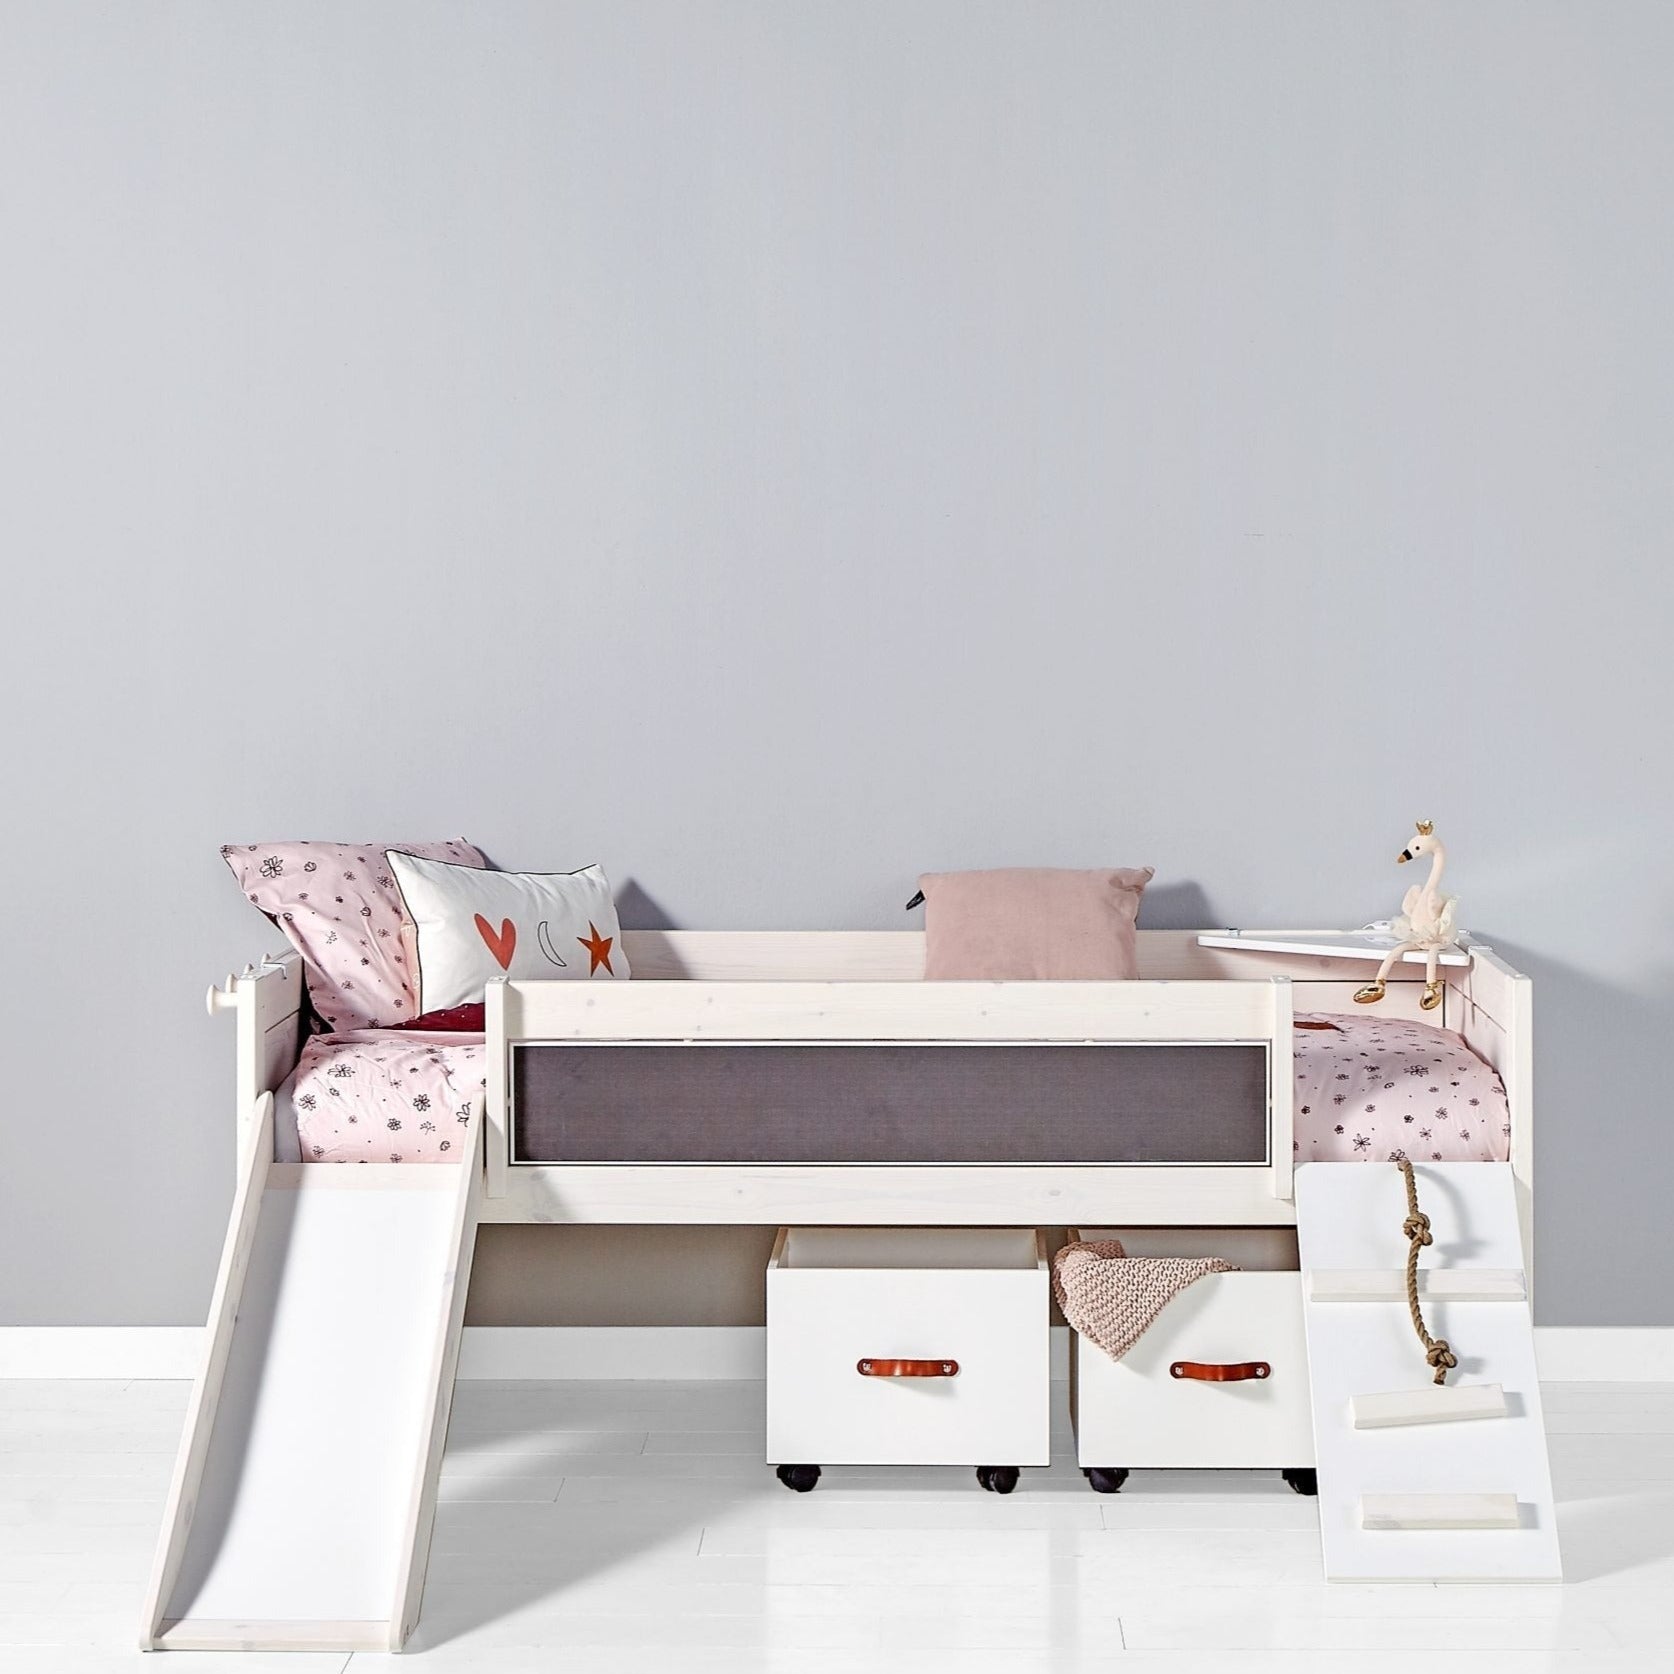 Climb and Slide Children’s bed by Lifetime Kids